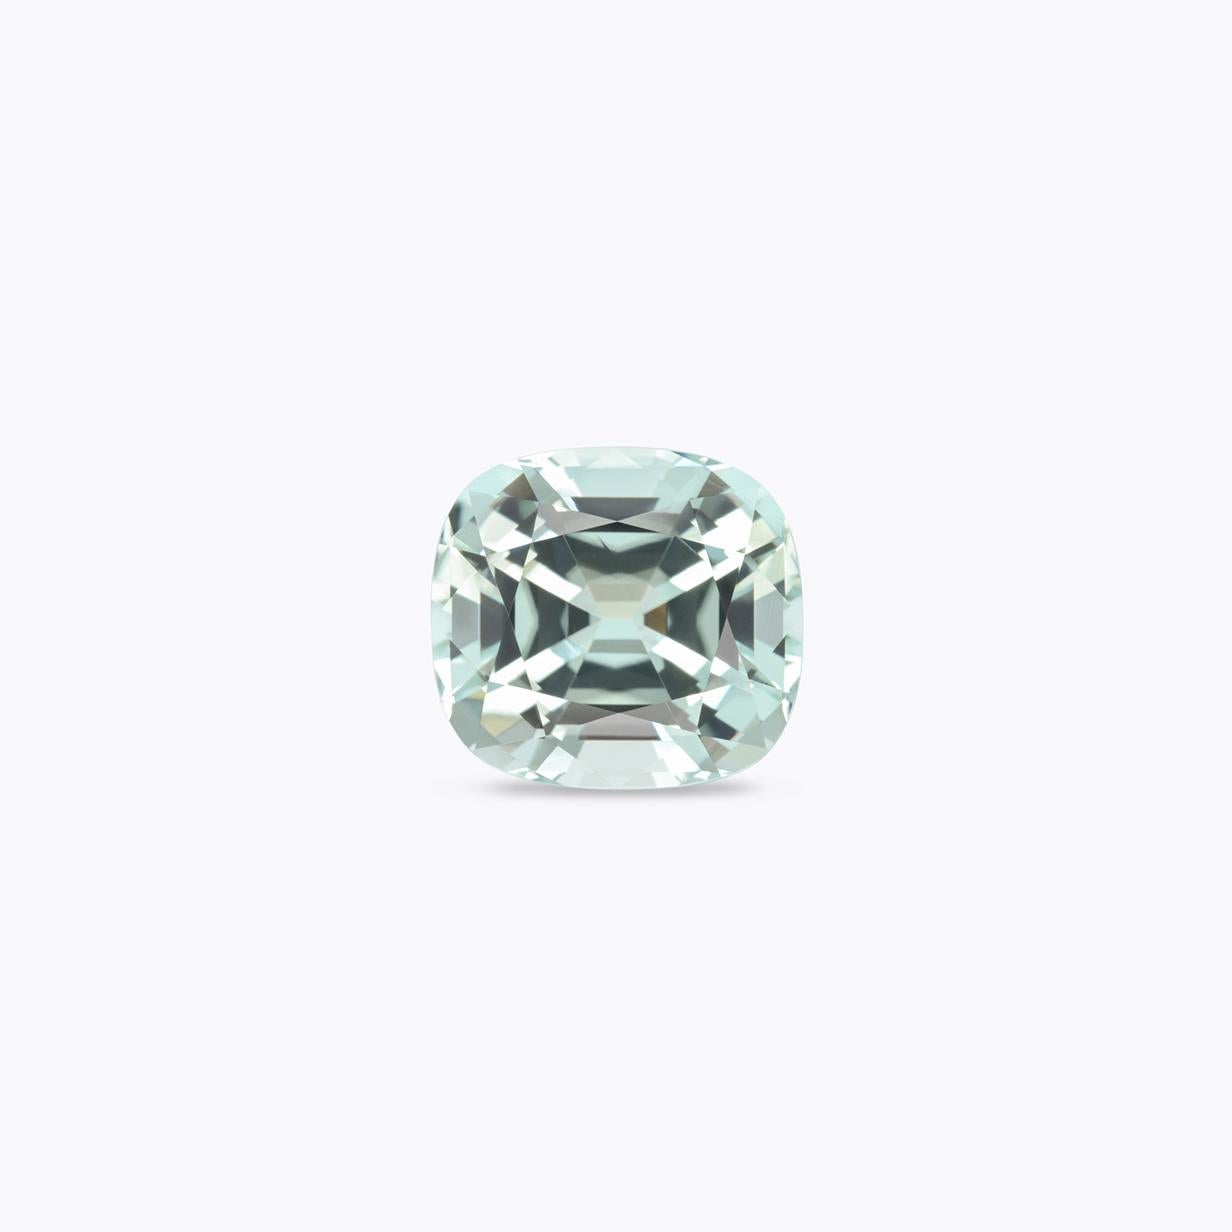 Desirable 10.66 carat Mint Tourmaline unmounted cushion gem, offered loose to a fine gemstone collector.
Dimensions: 14.10 x 13.00 x 9.10 mm
Returns are accepted and paid by us within 7 days of delivery.
We offer supreme custom jewelry work upon